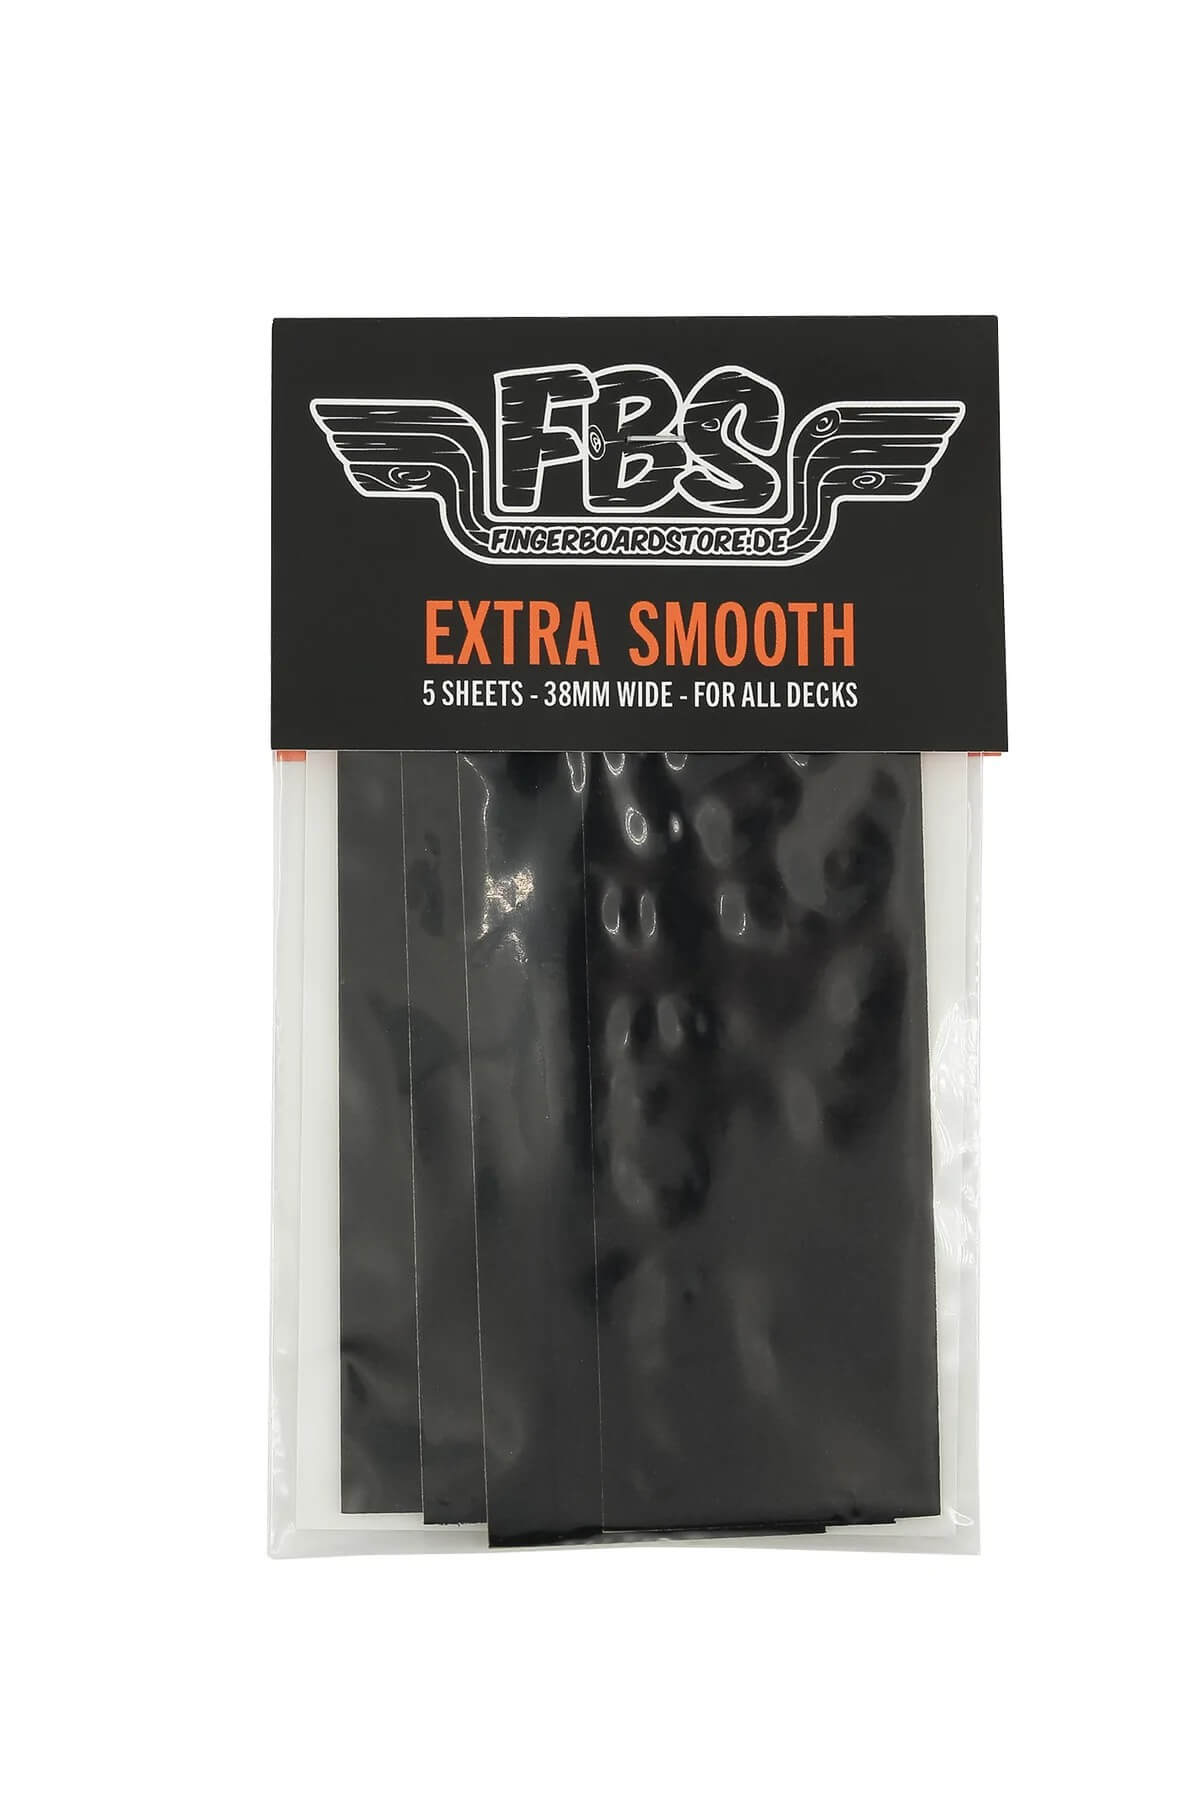 FBS Extra Smooth 5-Pack